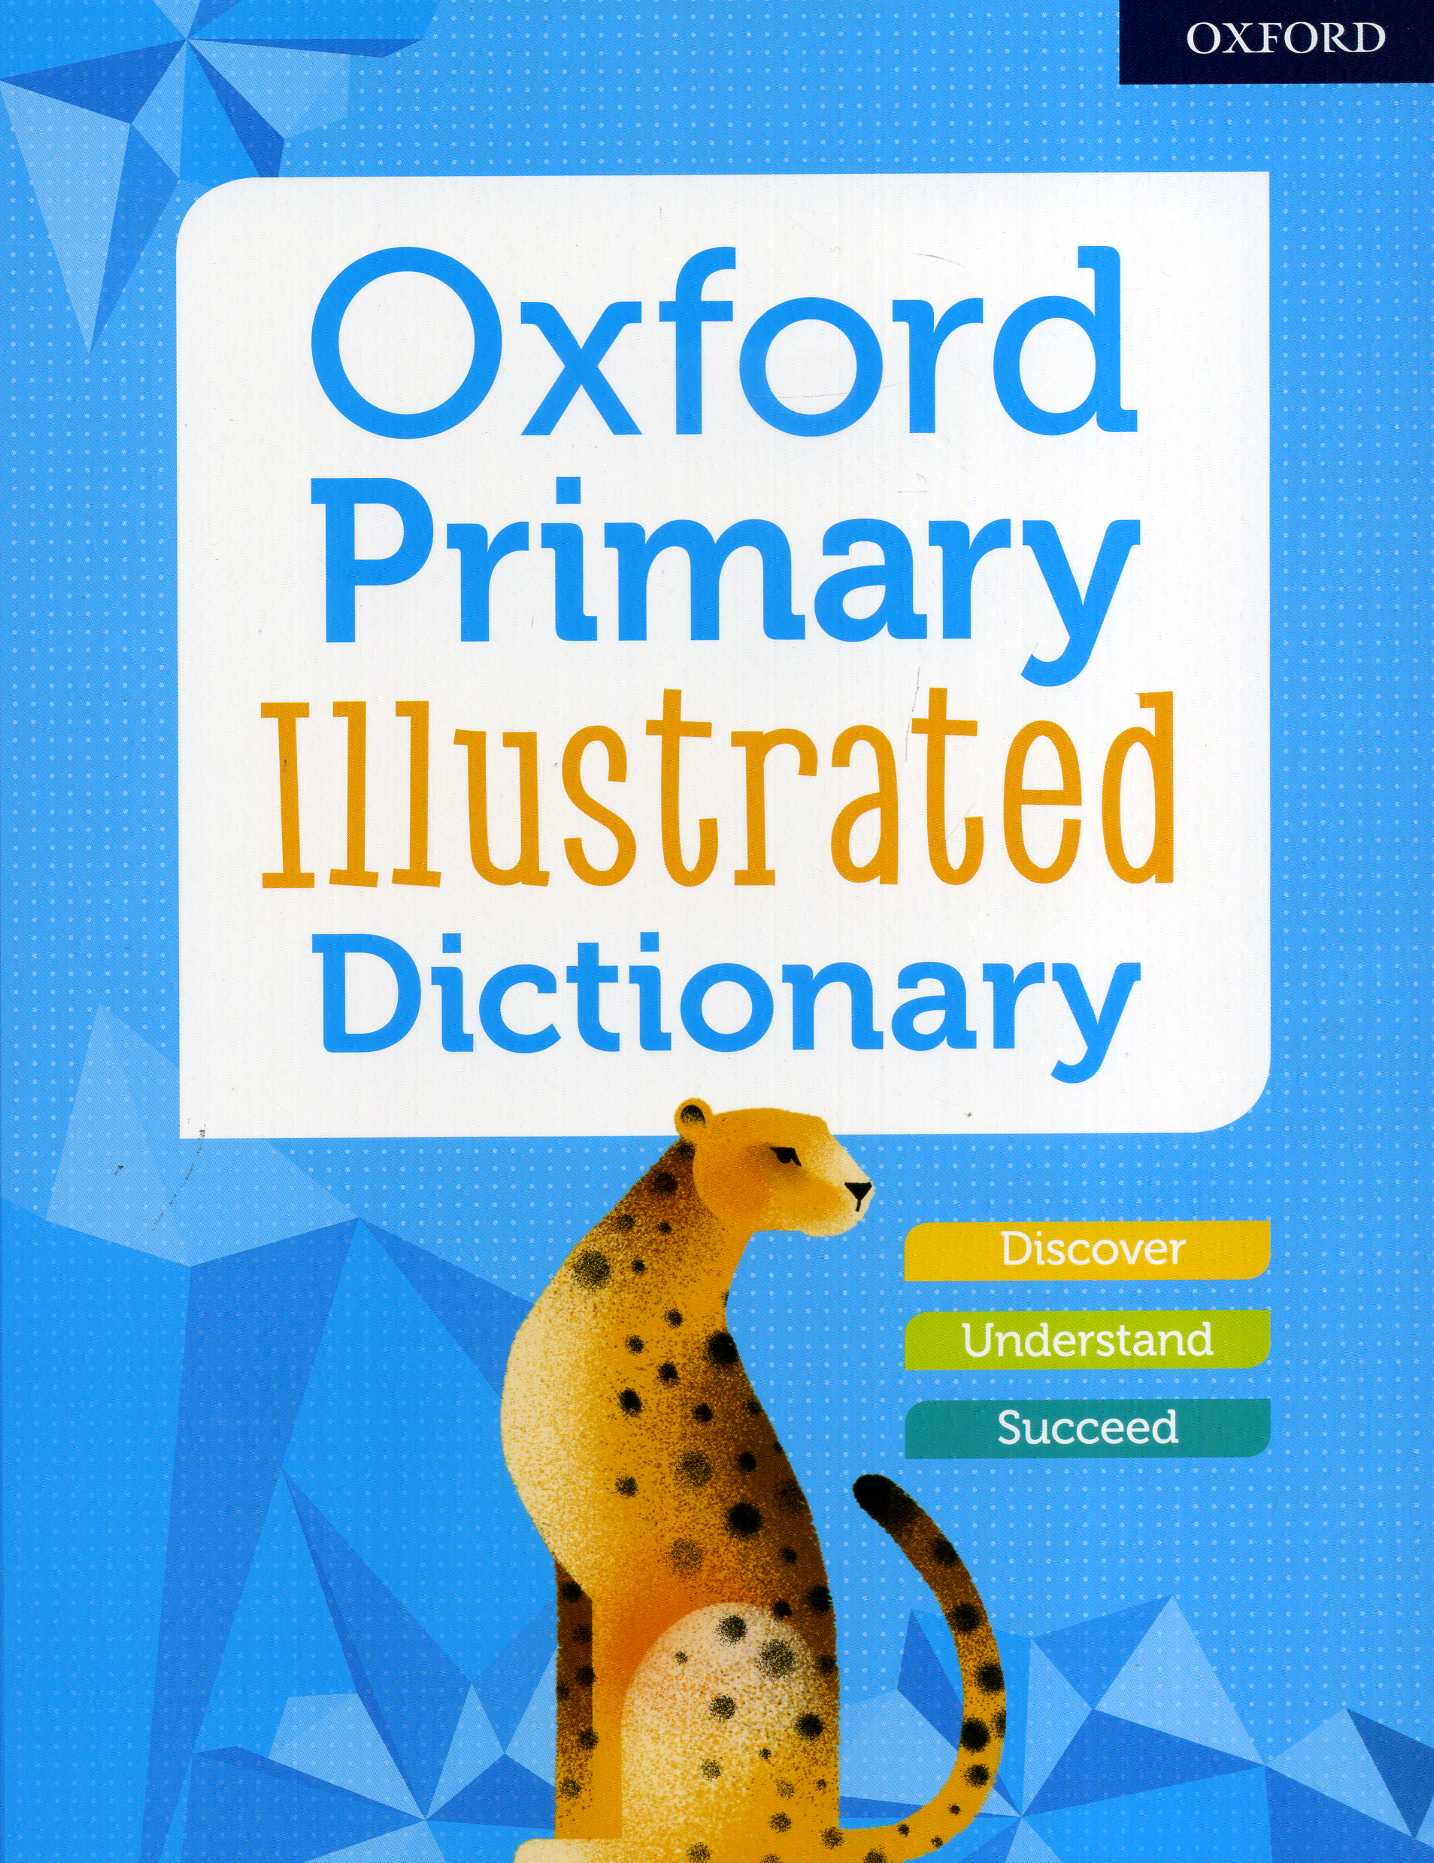 illustrated oxford dictionary download